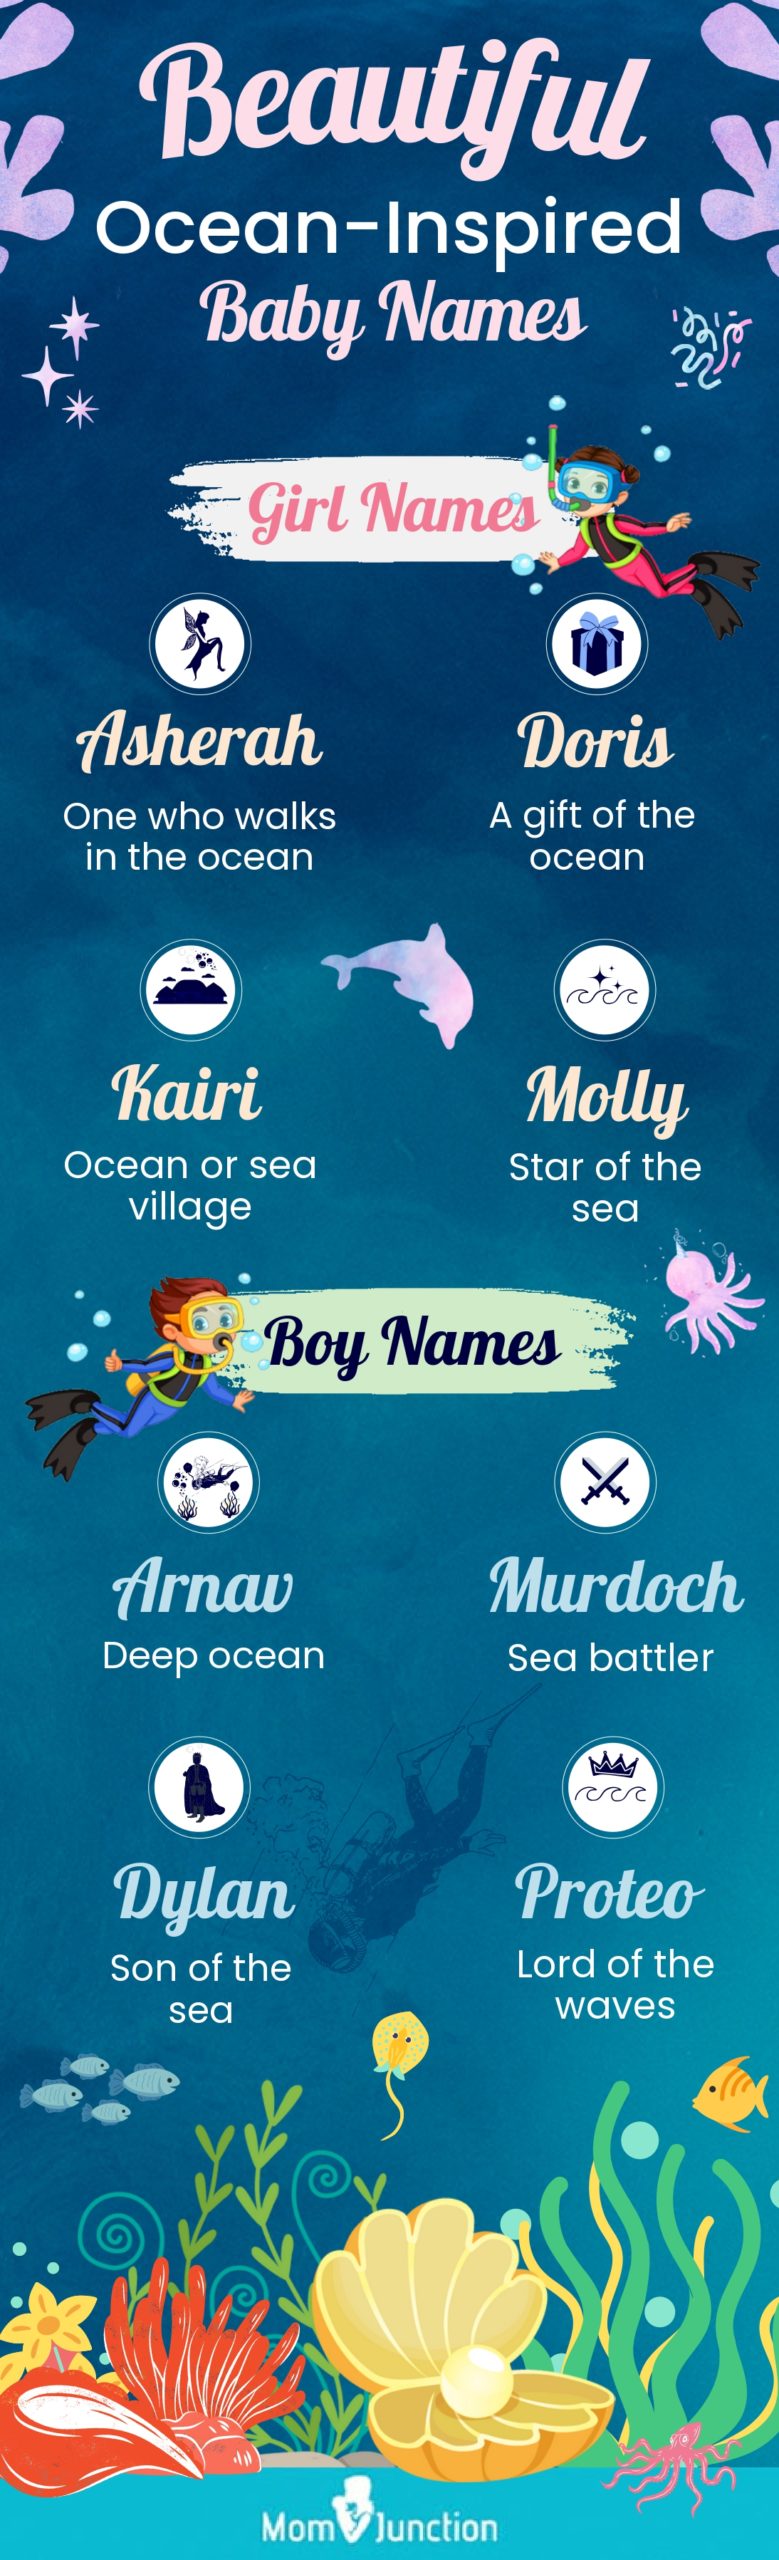 What are some girl names that mean ocean?